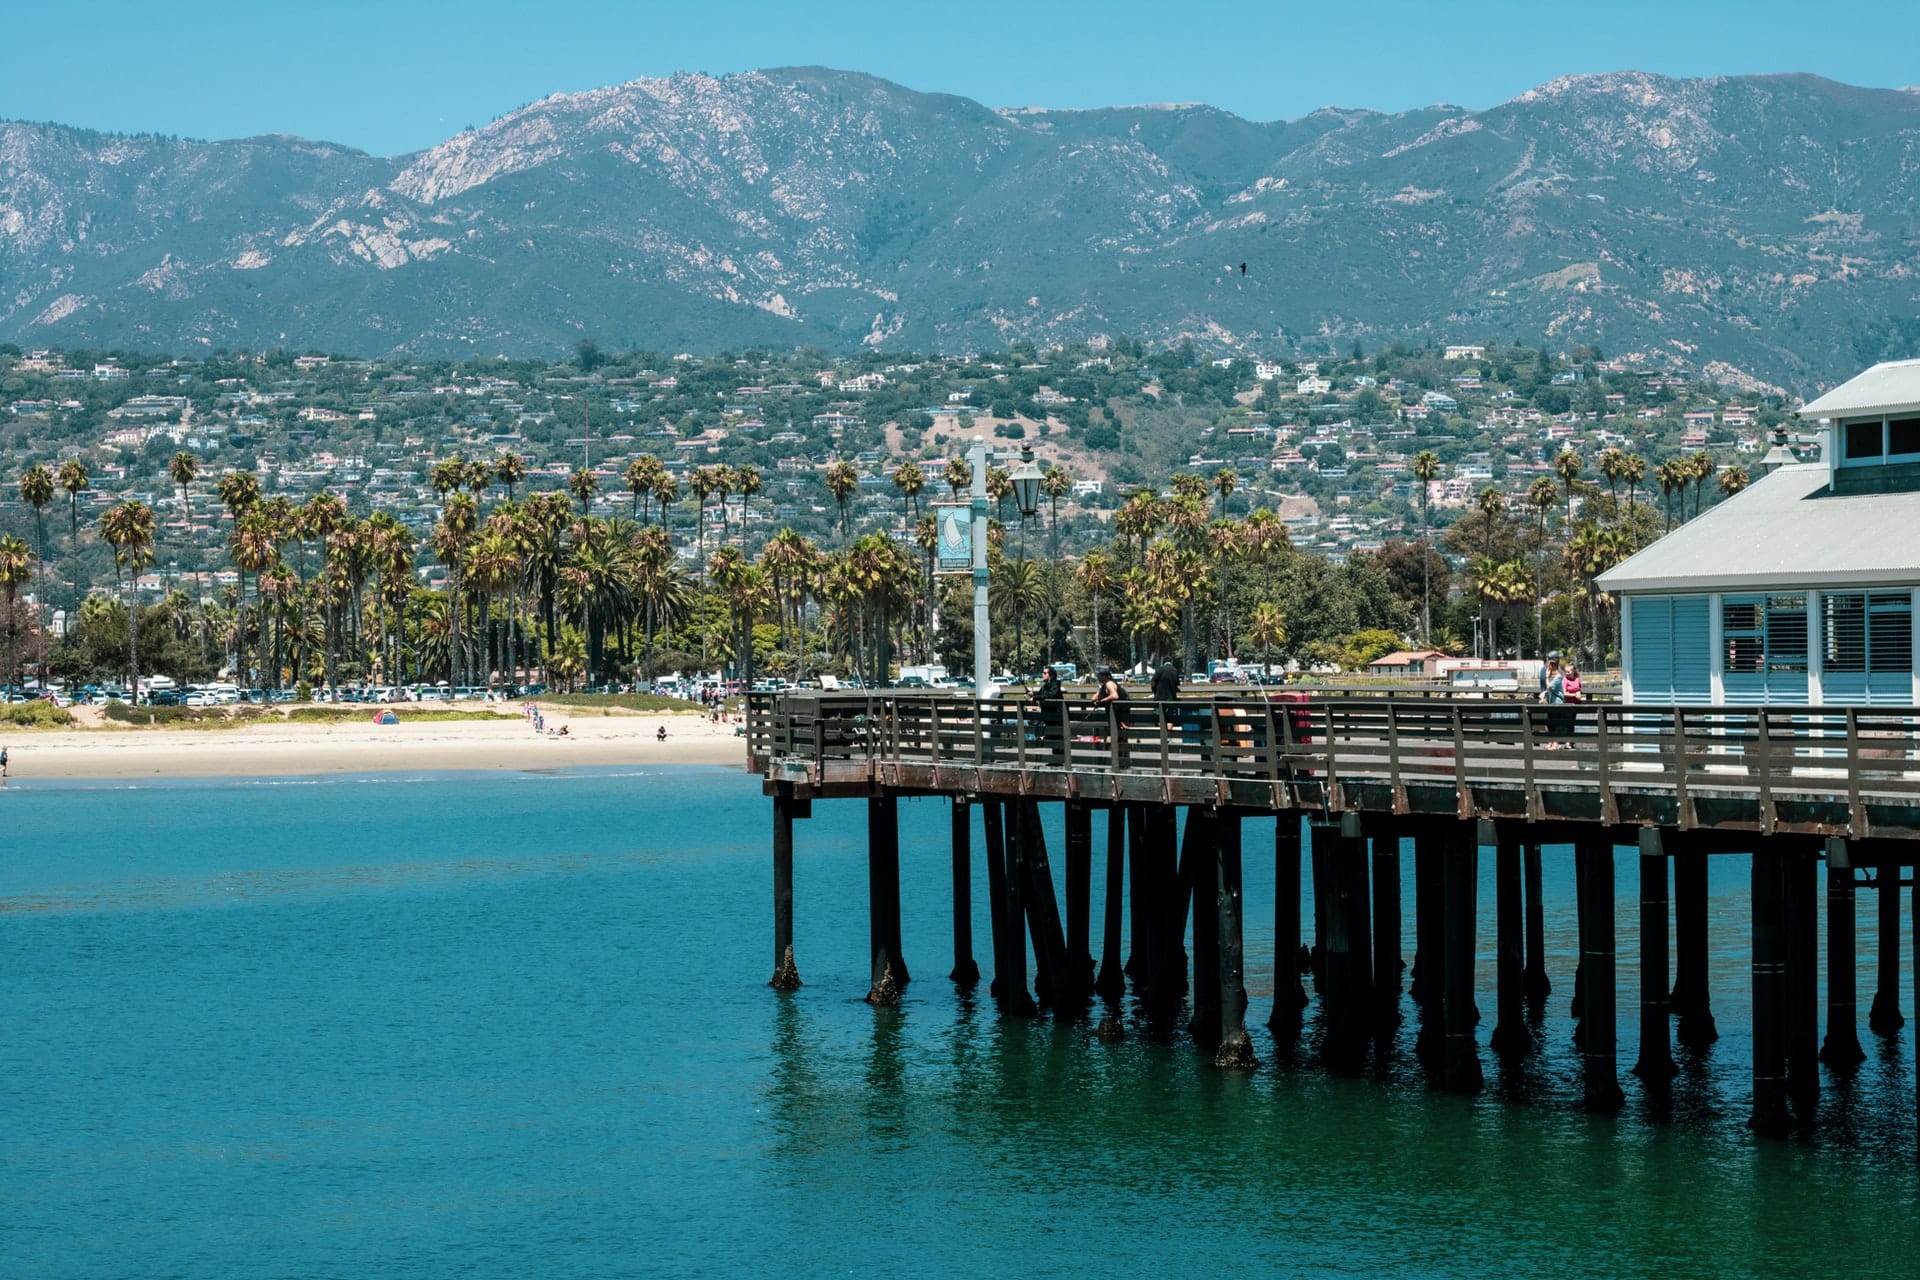 The Best Areas to Stay in Santa Barbara, CA